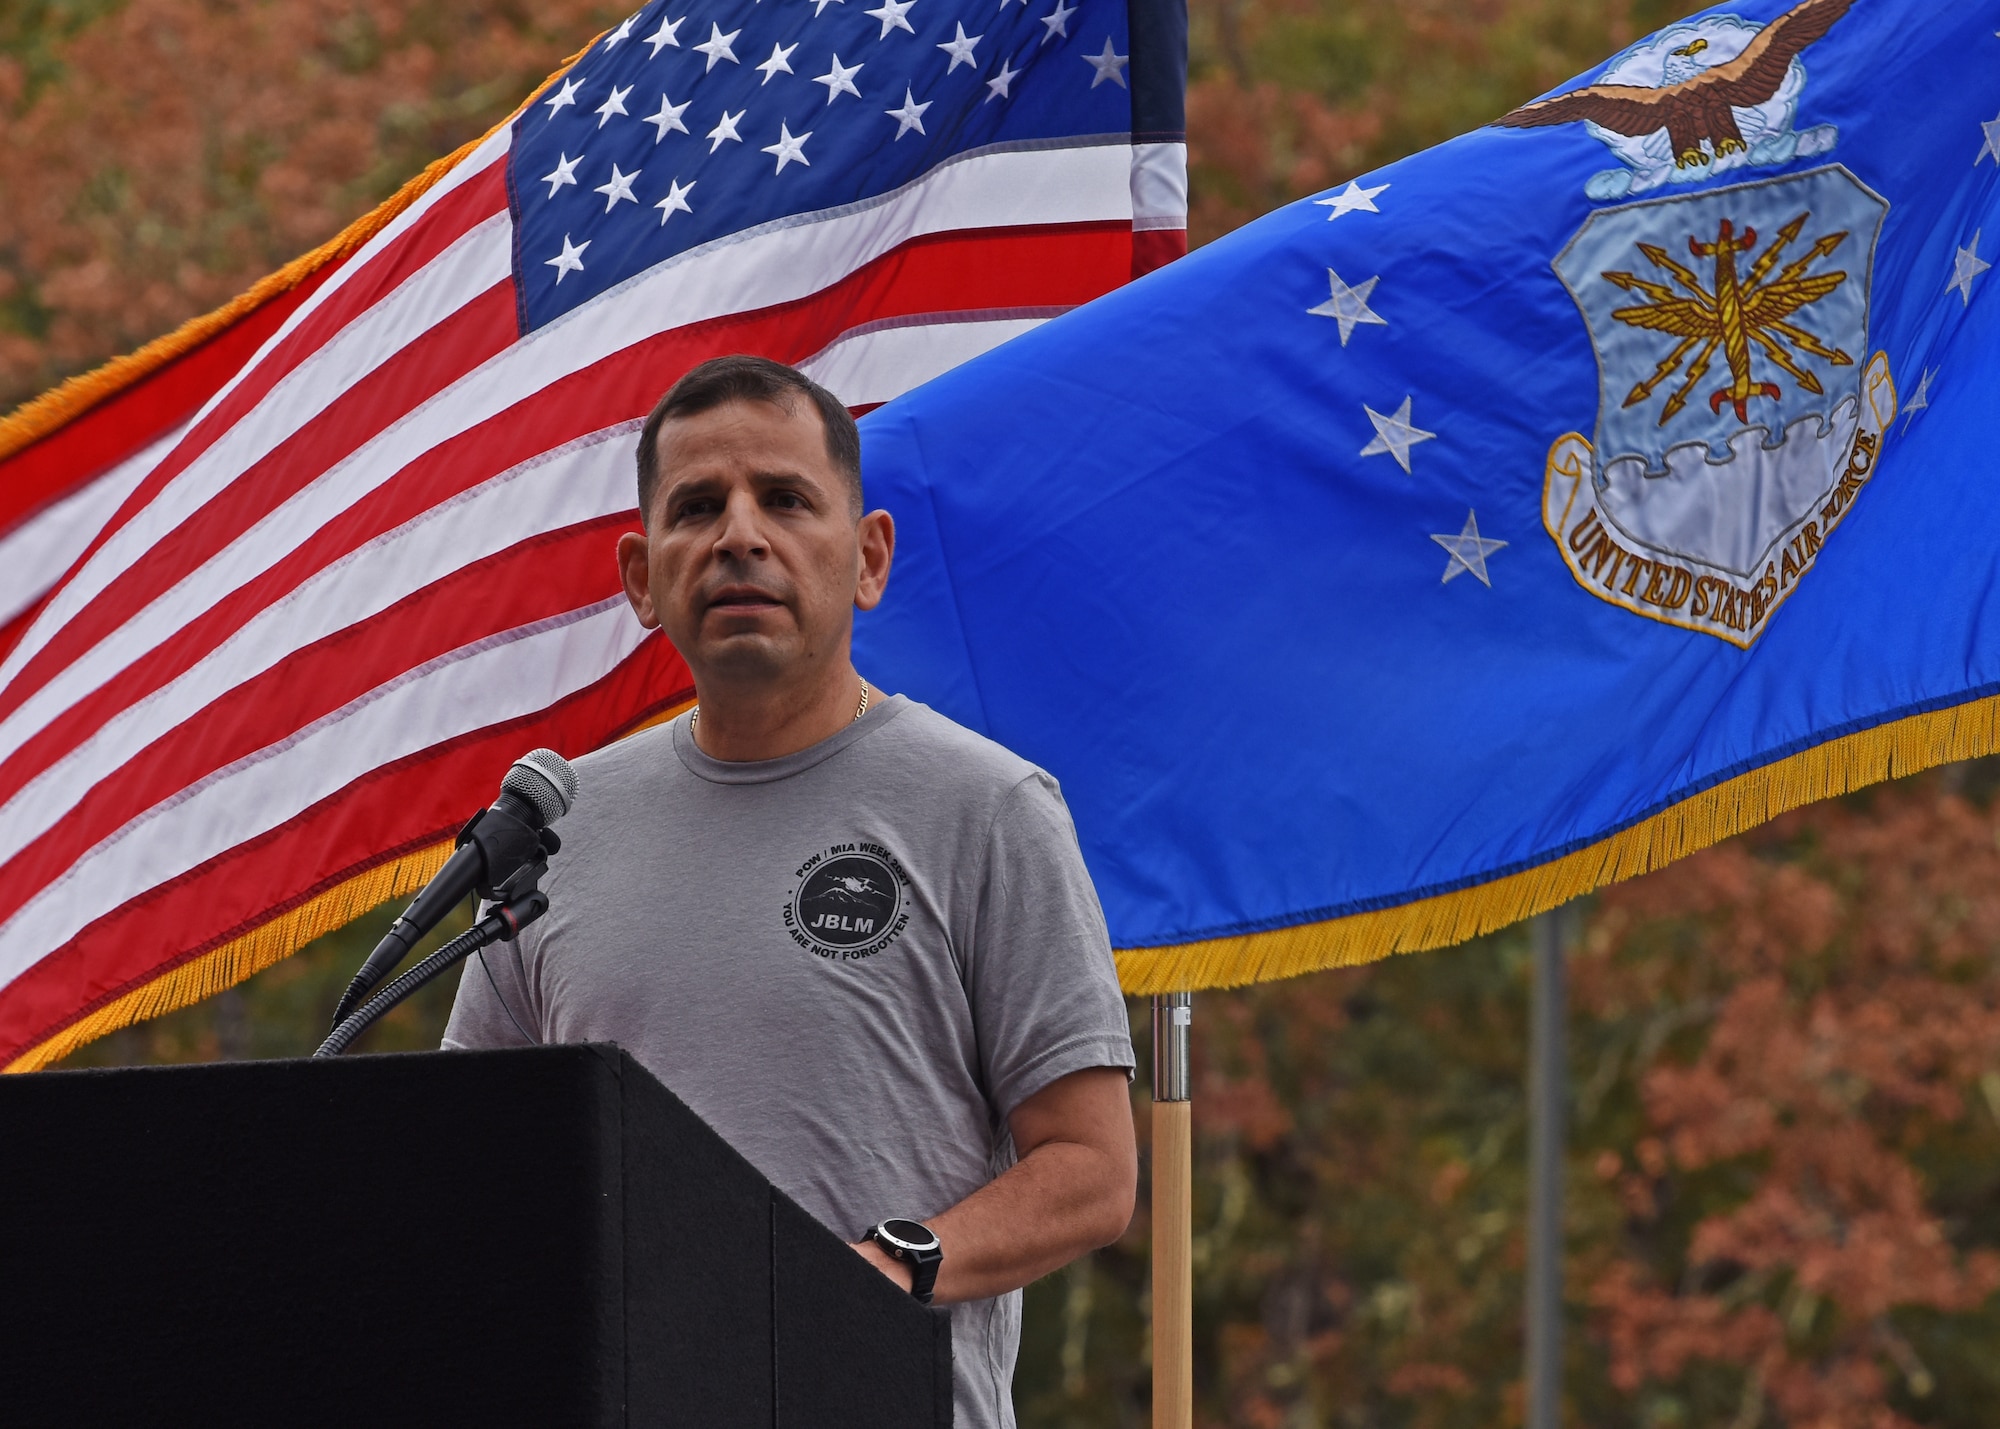 U.S. Air Force Col. Sergio Anaya, 62nd Operations Group commander, gives opening remarks during the 24-hour POW/MIA Remembrance run at Joint Base Lewis-McChord, Washington, Sept. 15, 2021. The run, in addition to the other scheduled events of the week, was to honor the more than 81,000 Americans who are still missing in action. (U.S. Air Force photo by Senior Airman Zoe Thacker)